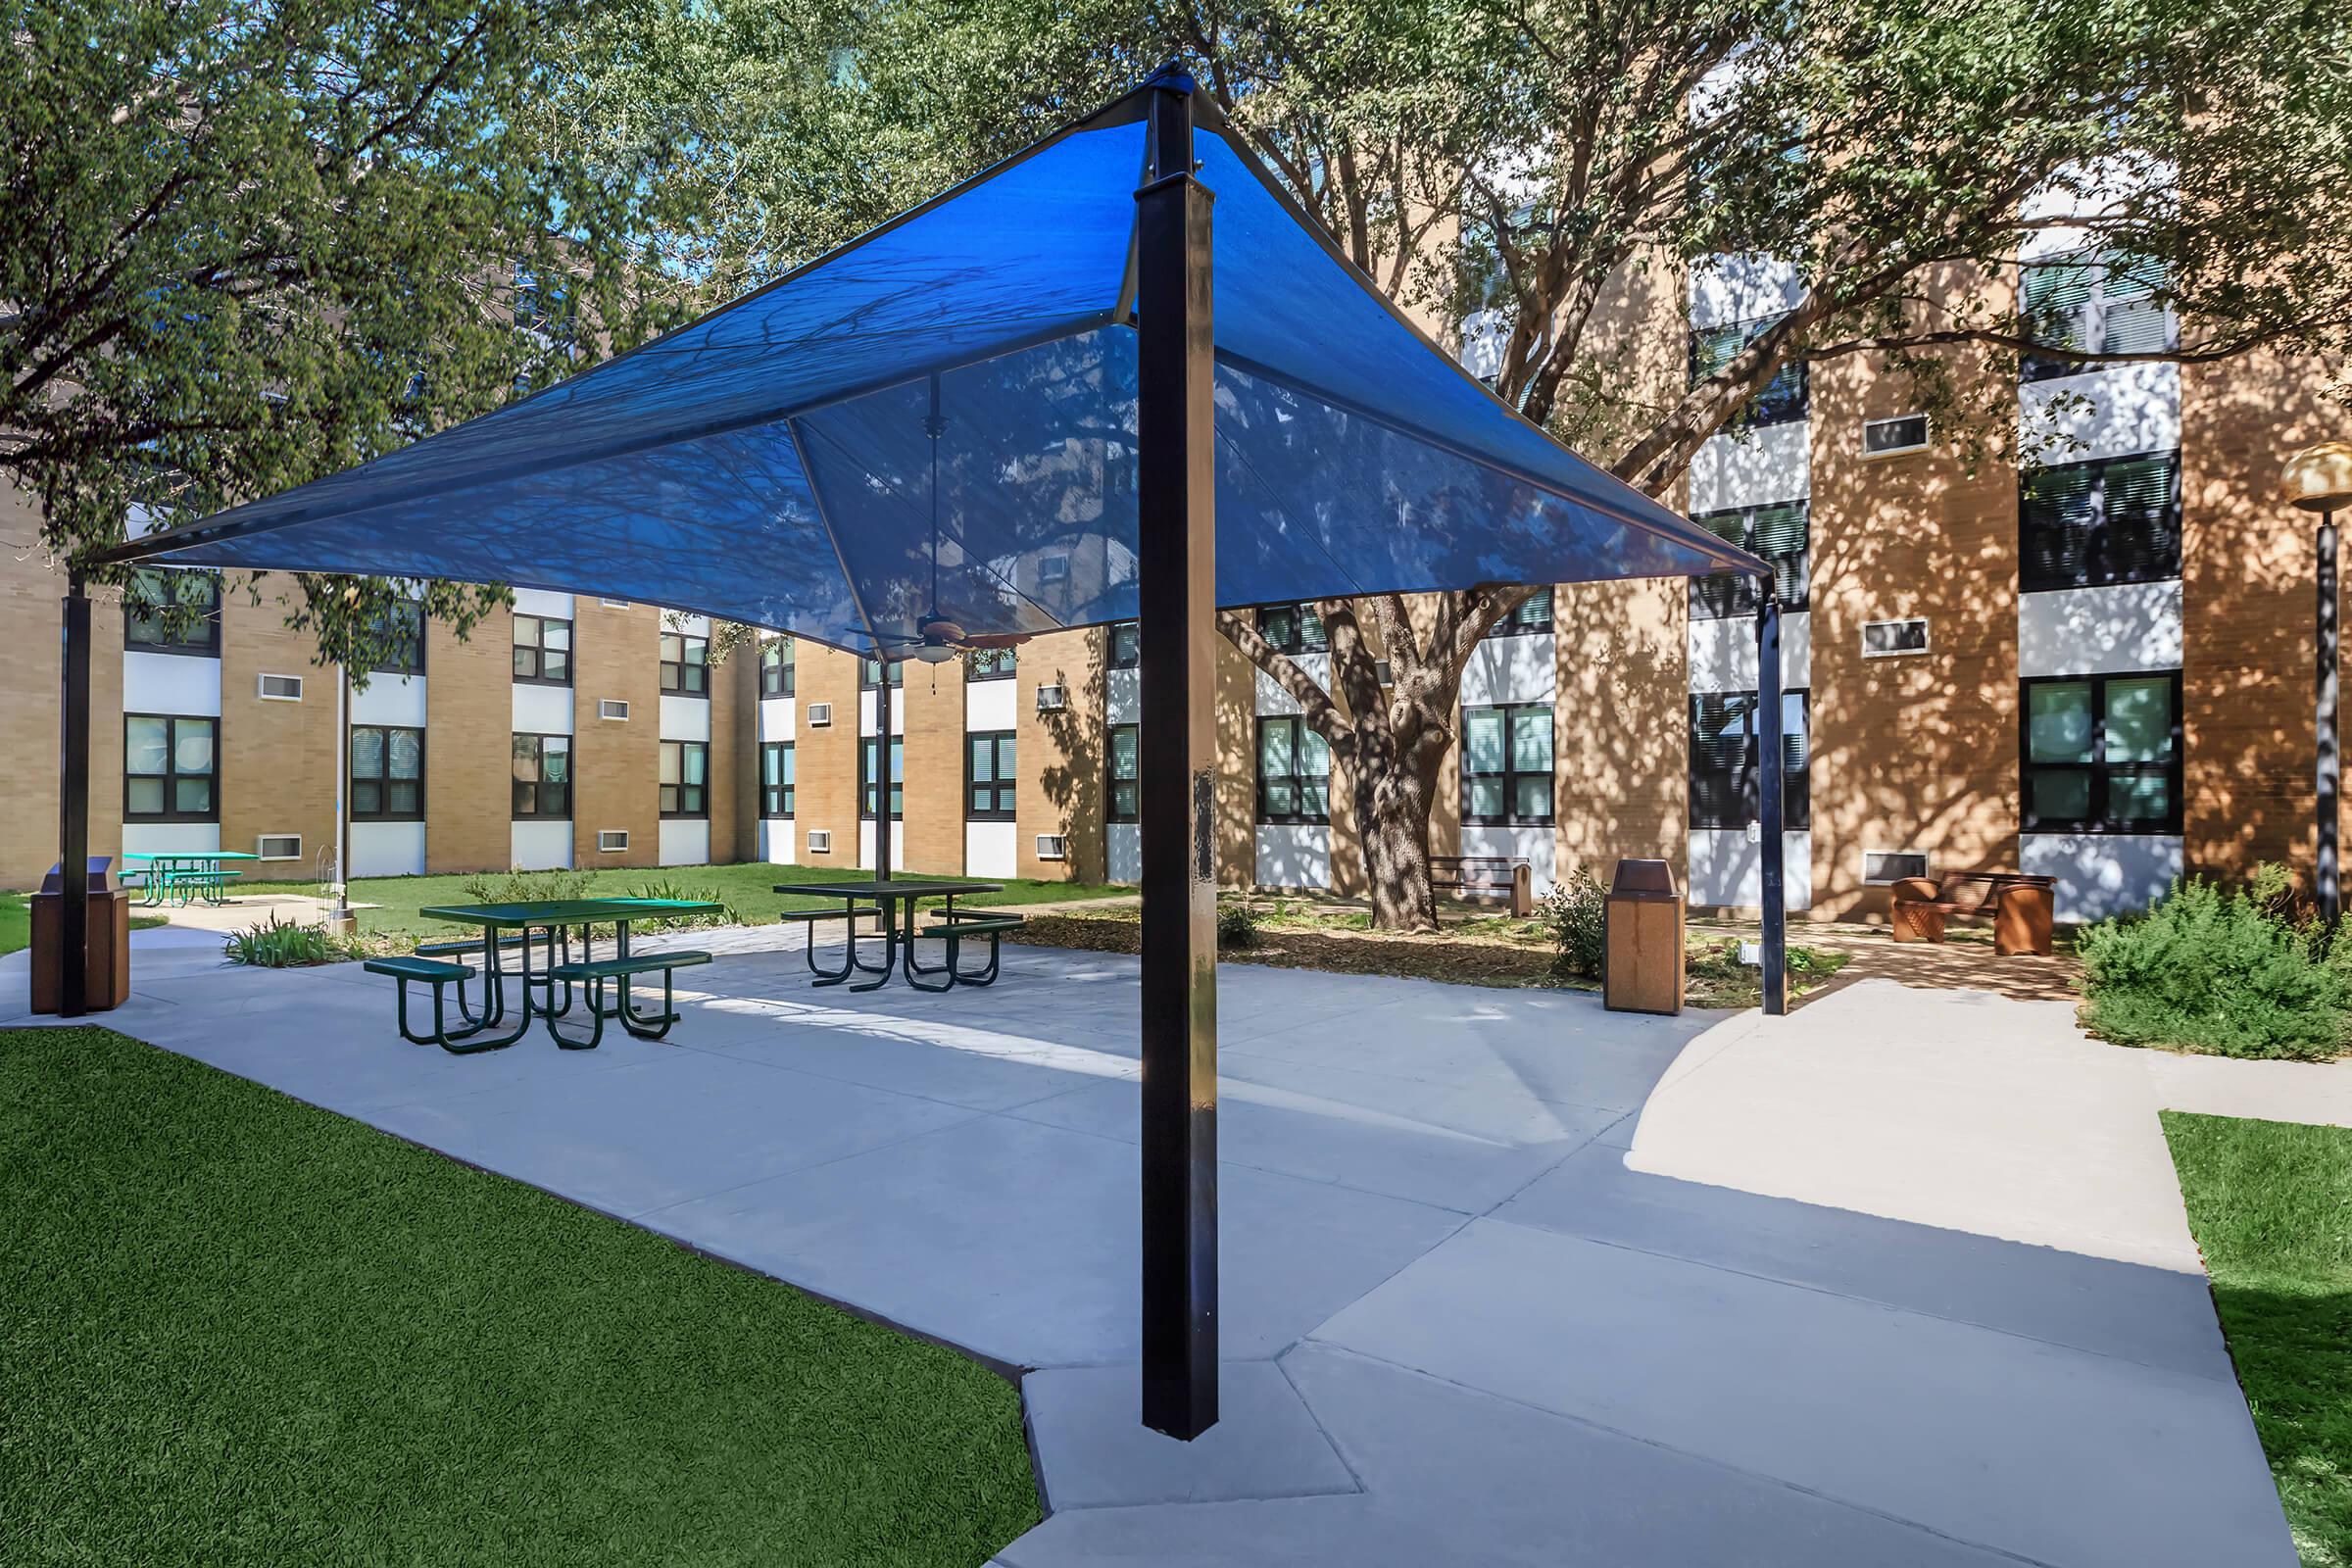 Linwood Square sun shade with picnic tables